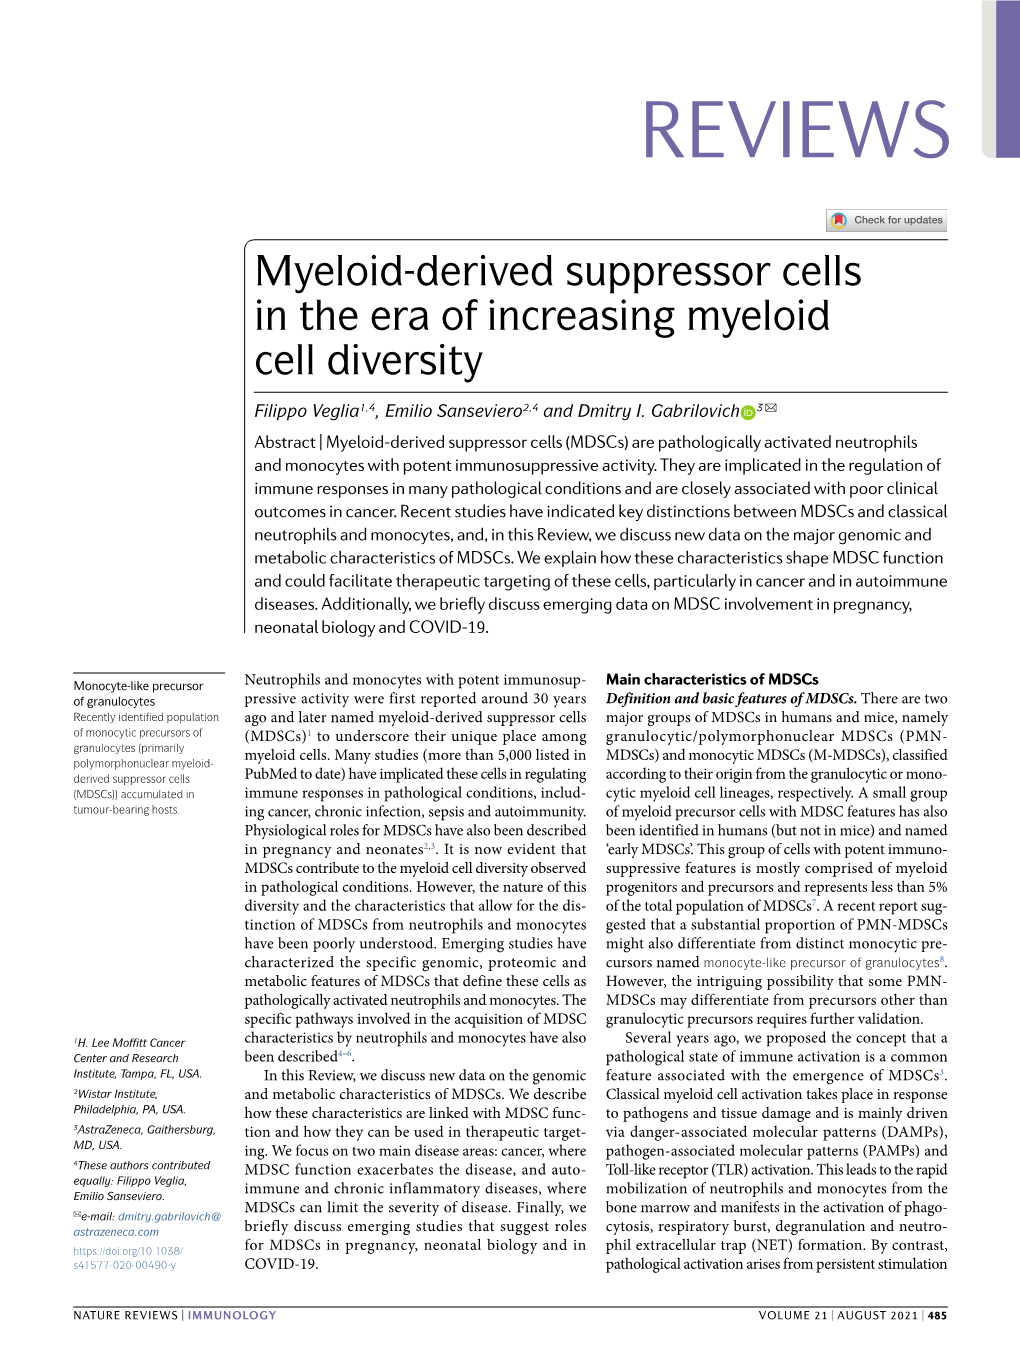 Derived Suppressor Cells in the Era of Increasing Myeloid Cell Diversity